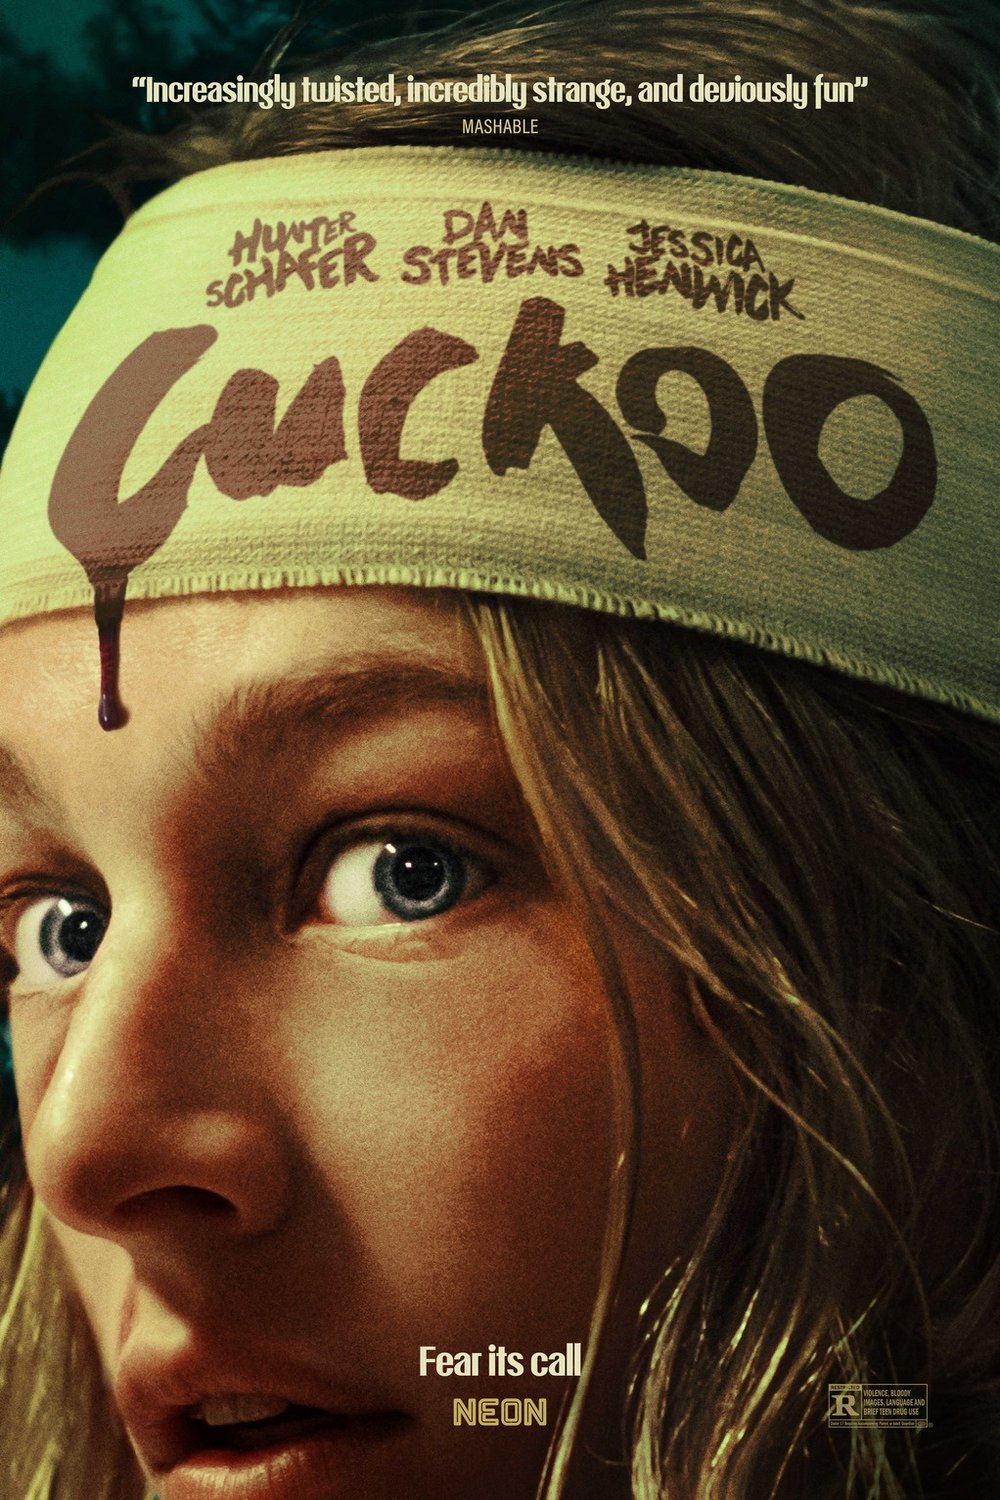 Poster of the movie Cuckoo